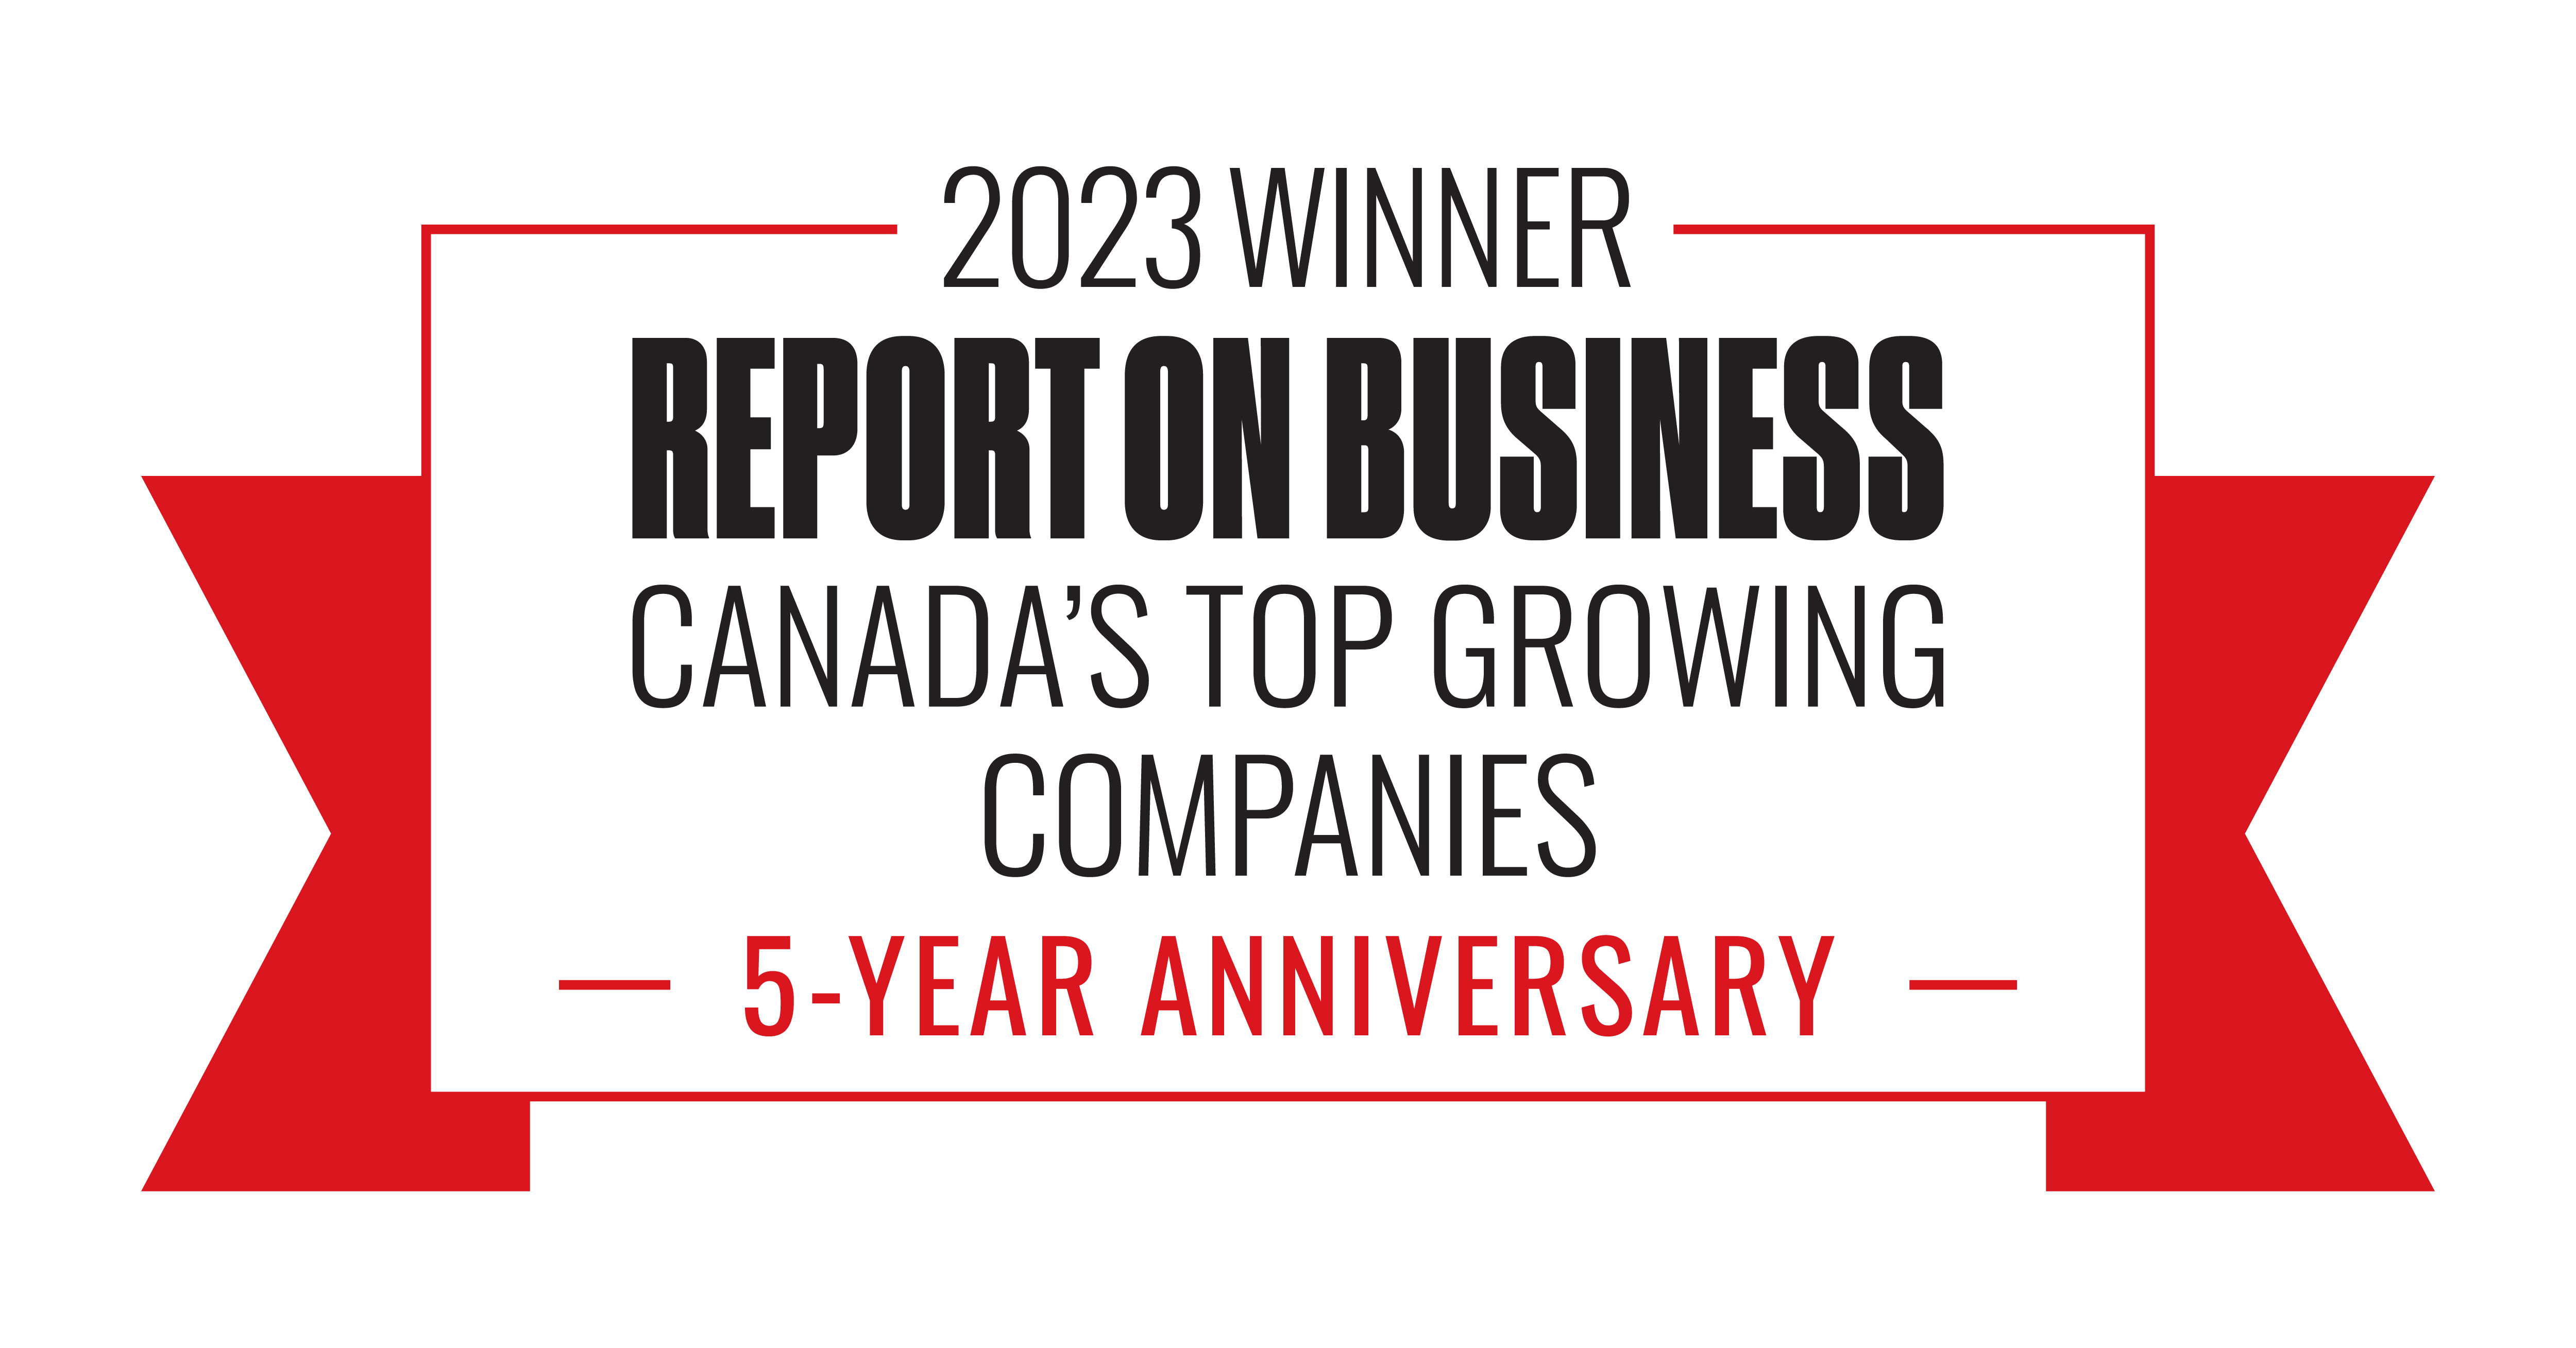 Matrix HR: Places #130th on the Globe and Mail Canada's Top Growing Companies list for 2023